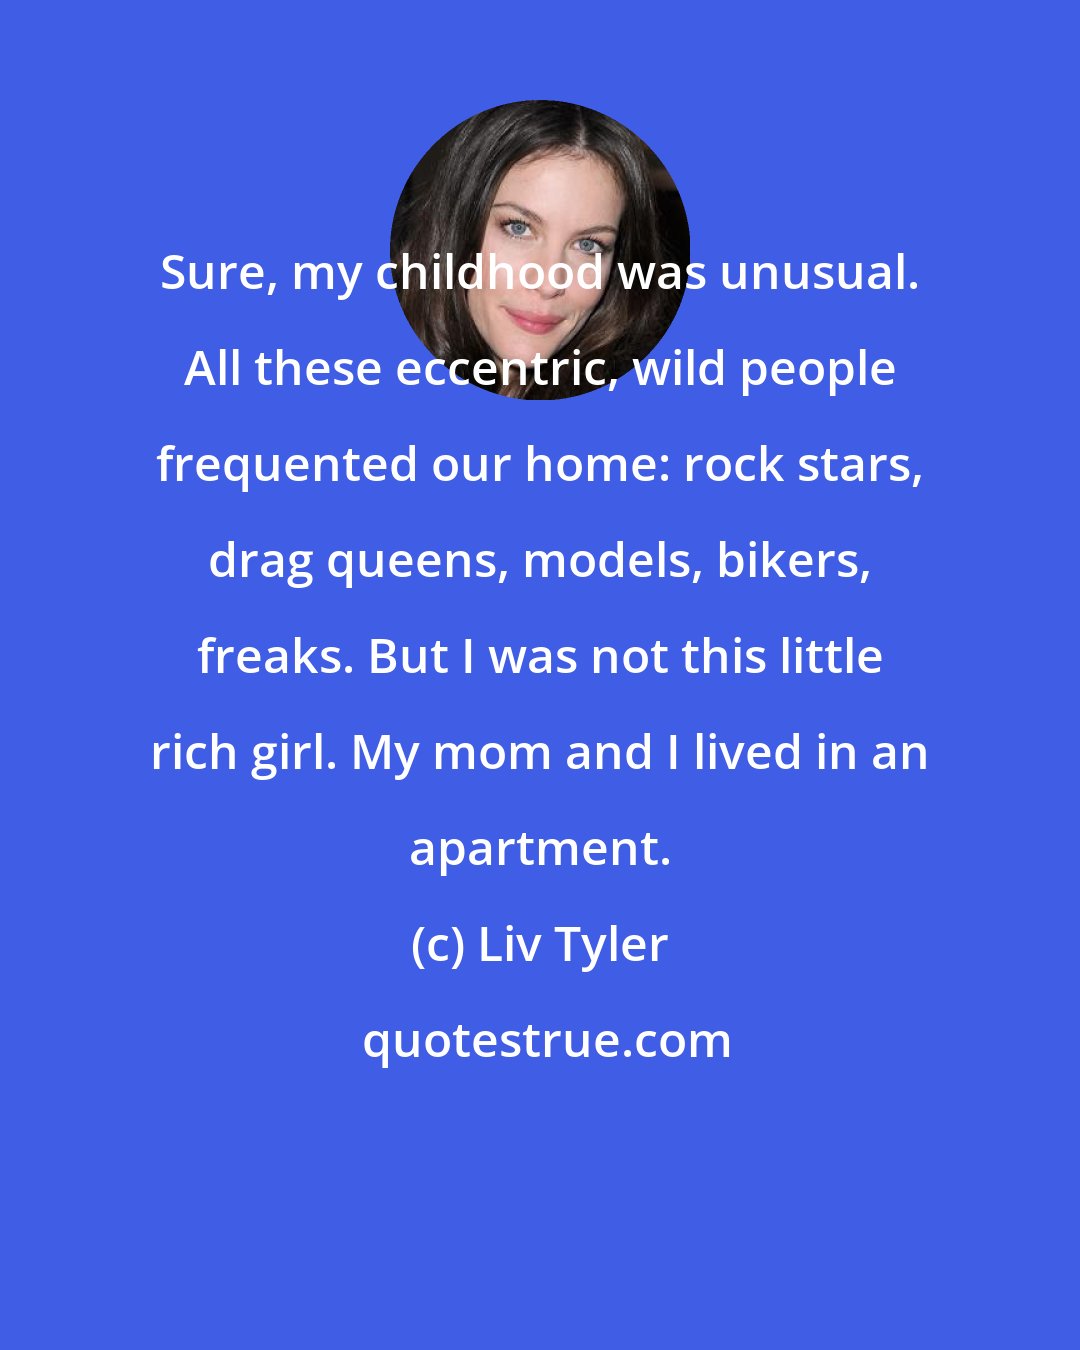 Liv Tyler: Sure, my childhood was unusual. All these eccentric, wild people frequented our home: rock stars, drag queens, models, bikers, freaks. But I was not this little rich girl. My mom and I lived in an apartment.